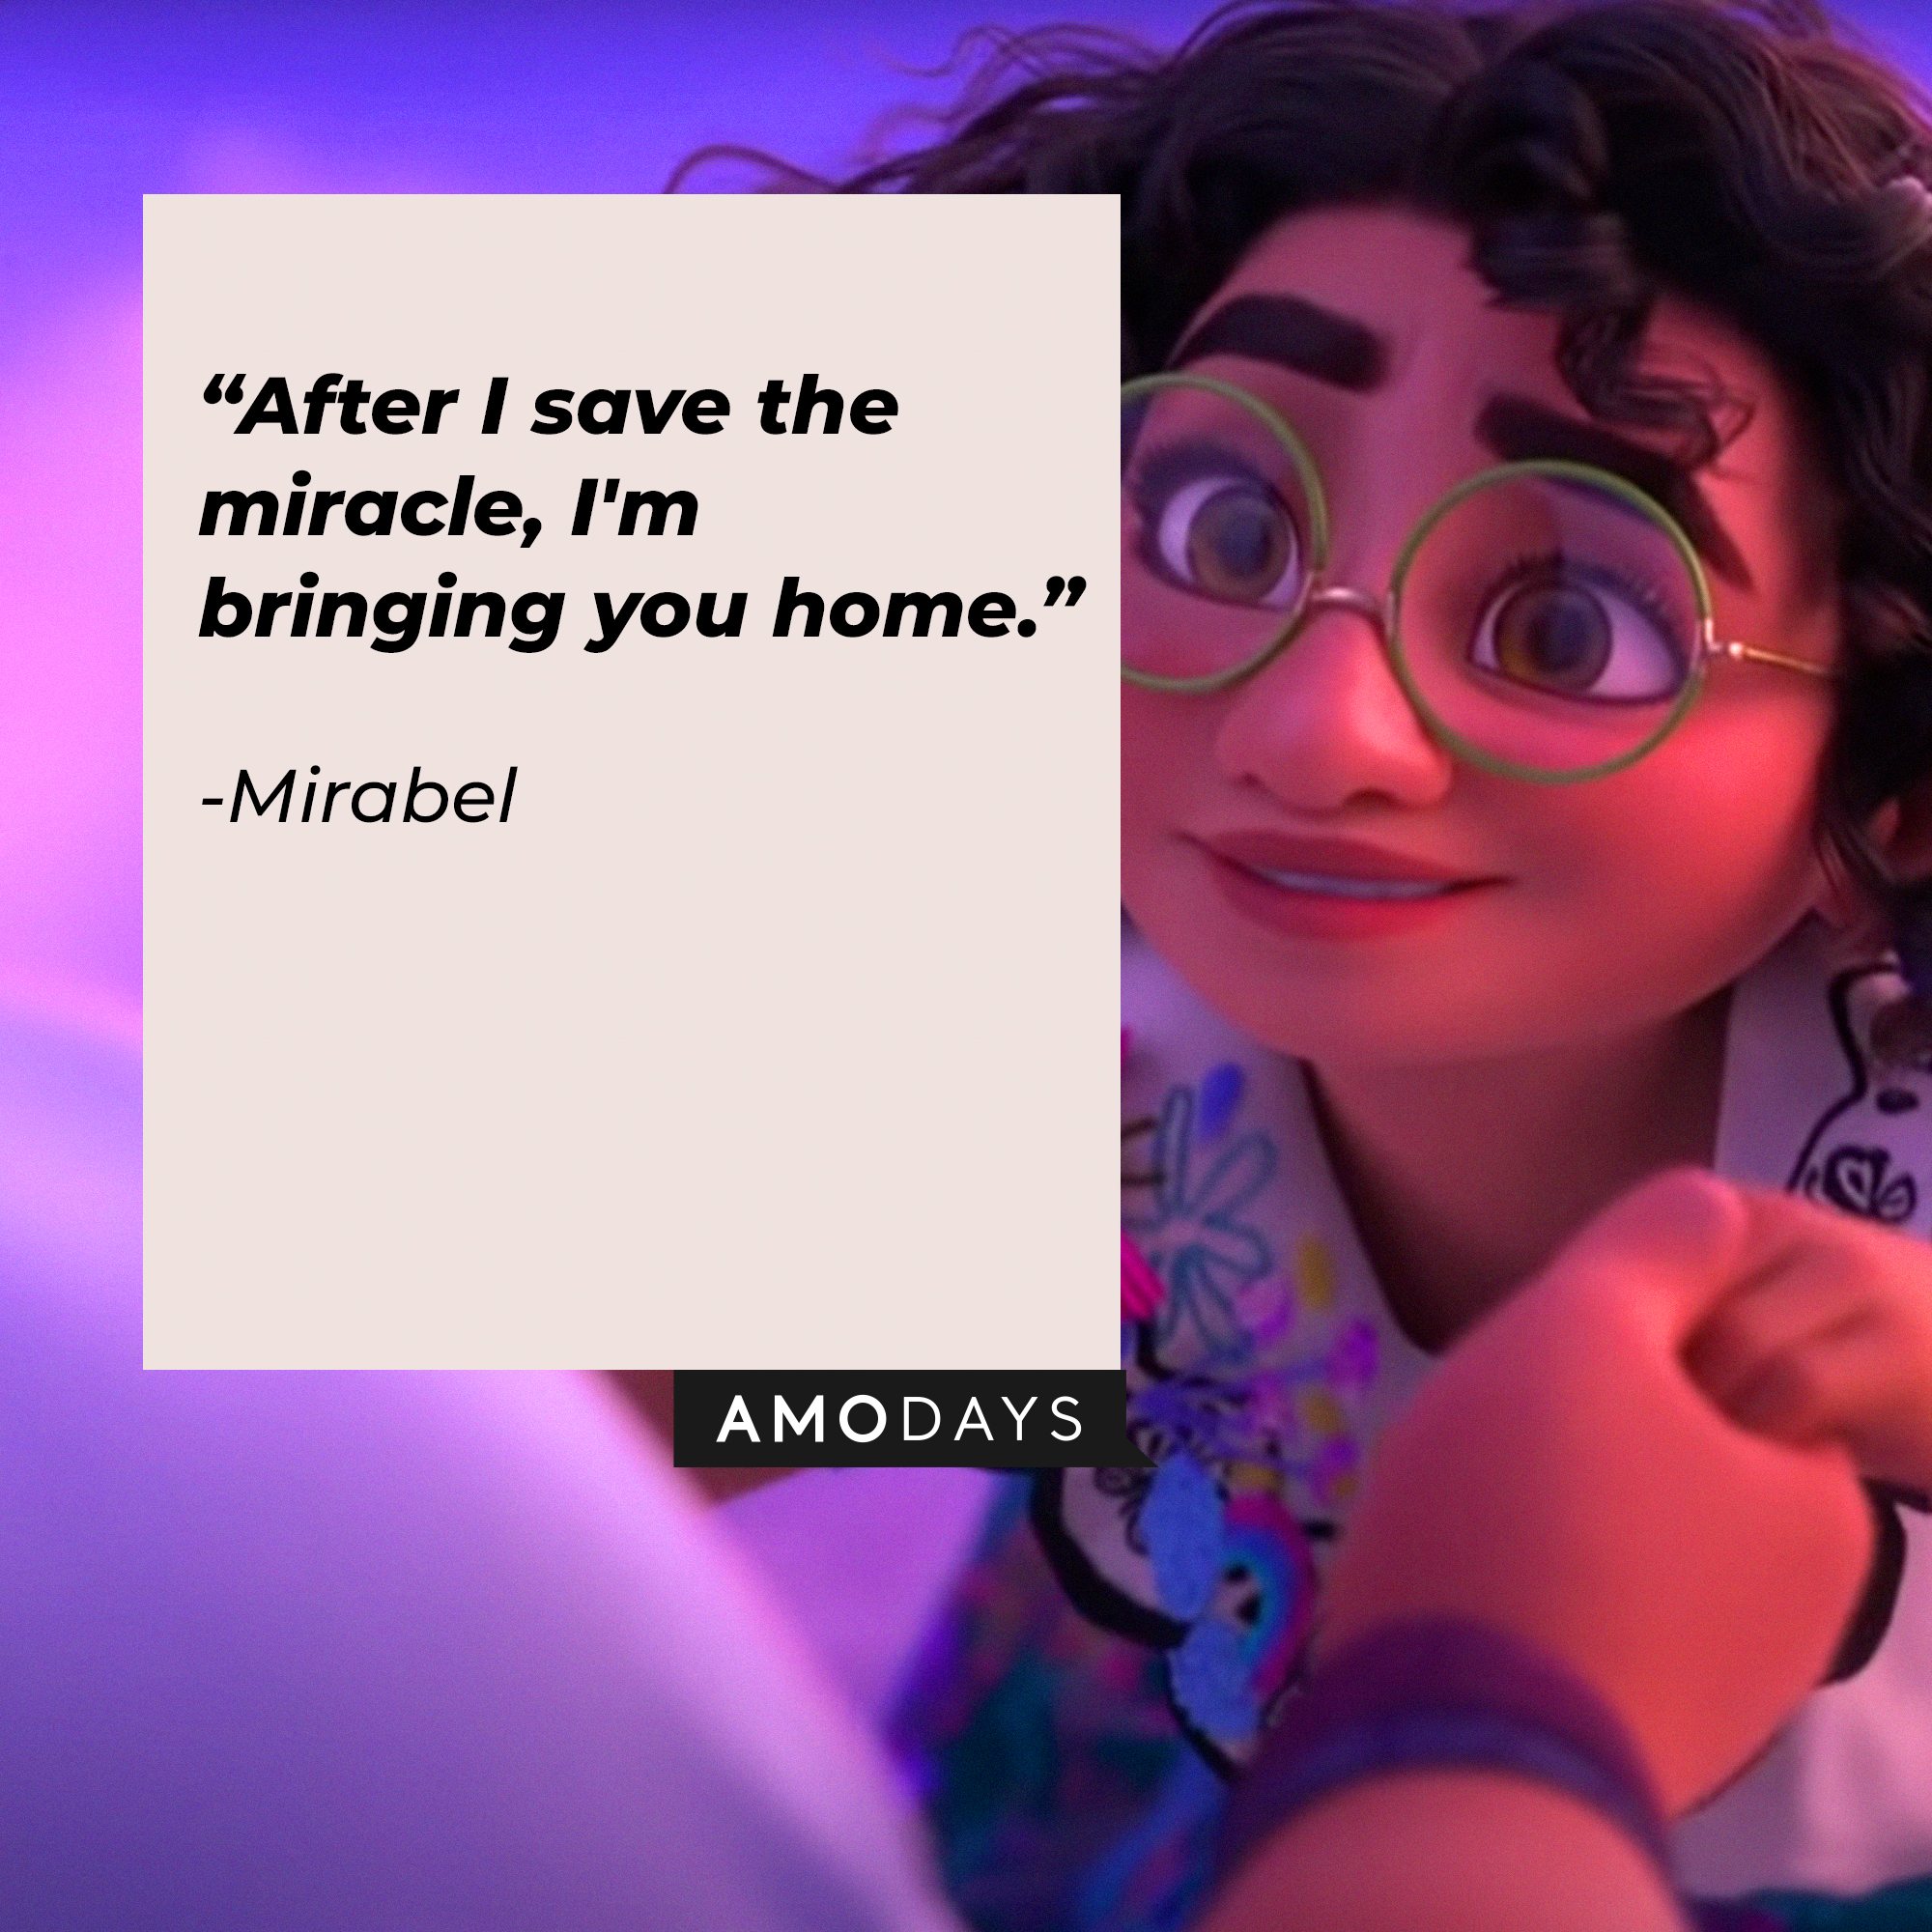 An image of Mirabel, with her quote: "After I save the miracle, I'm bringing you home." | Source: Youtube.com/DisneyMusicVEVO